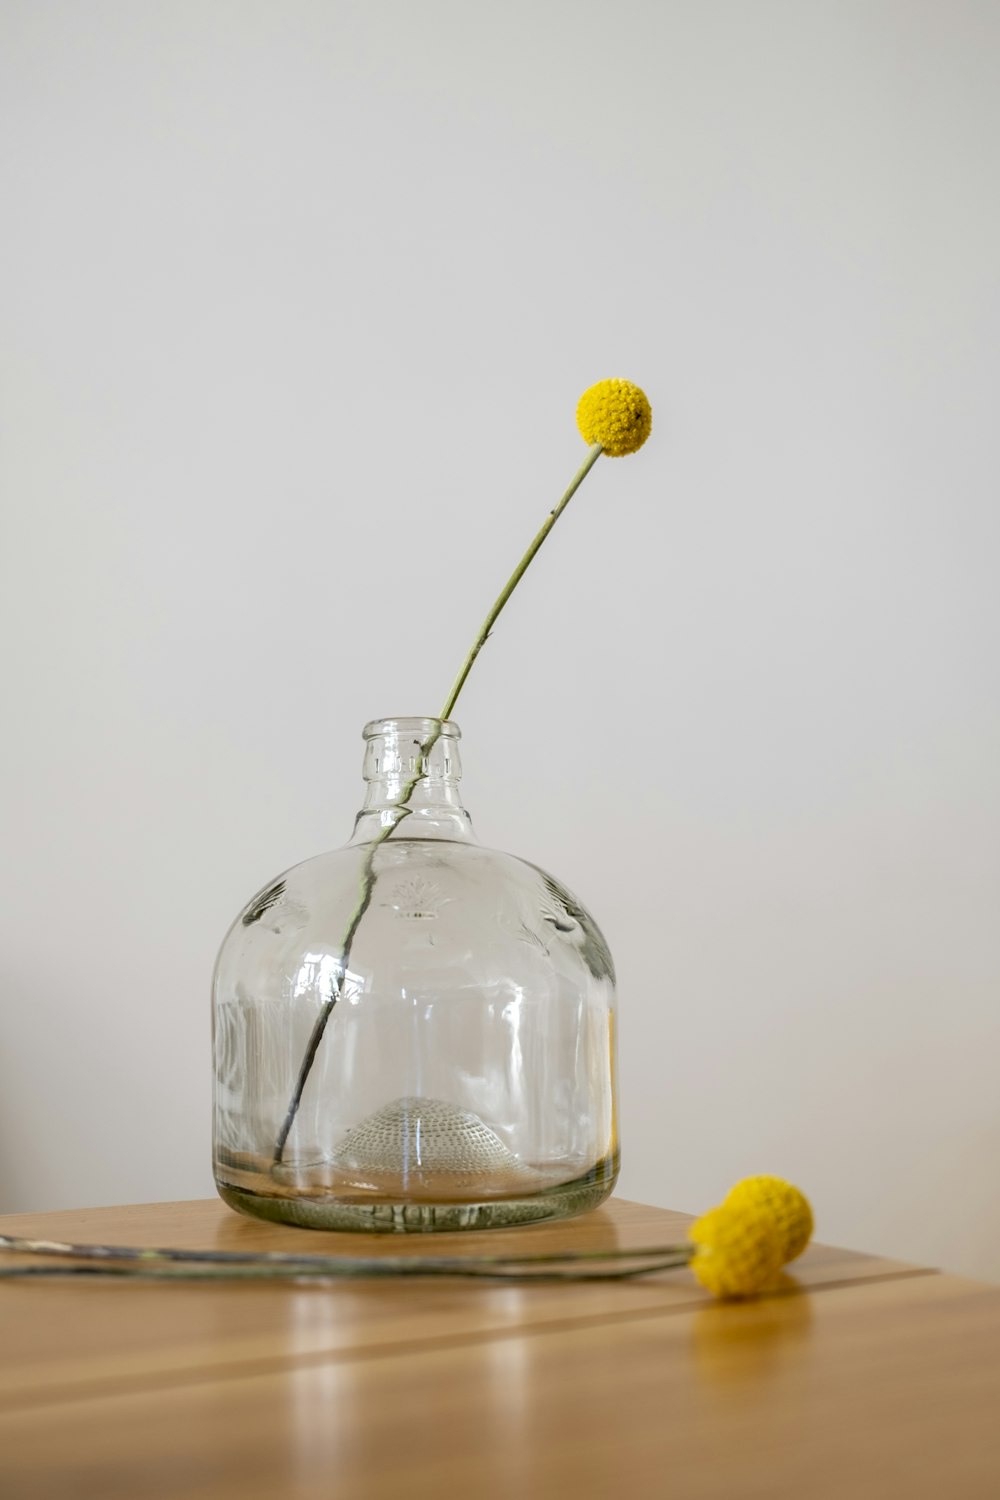 a glass vase with a single yellow flower in it